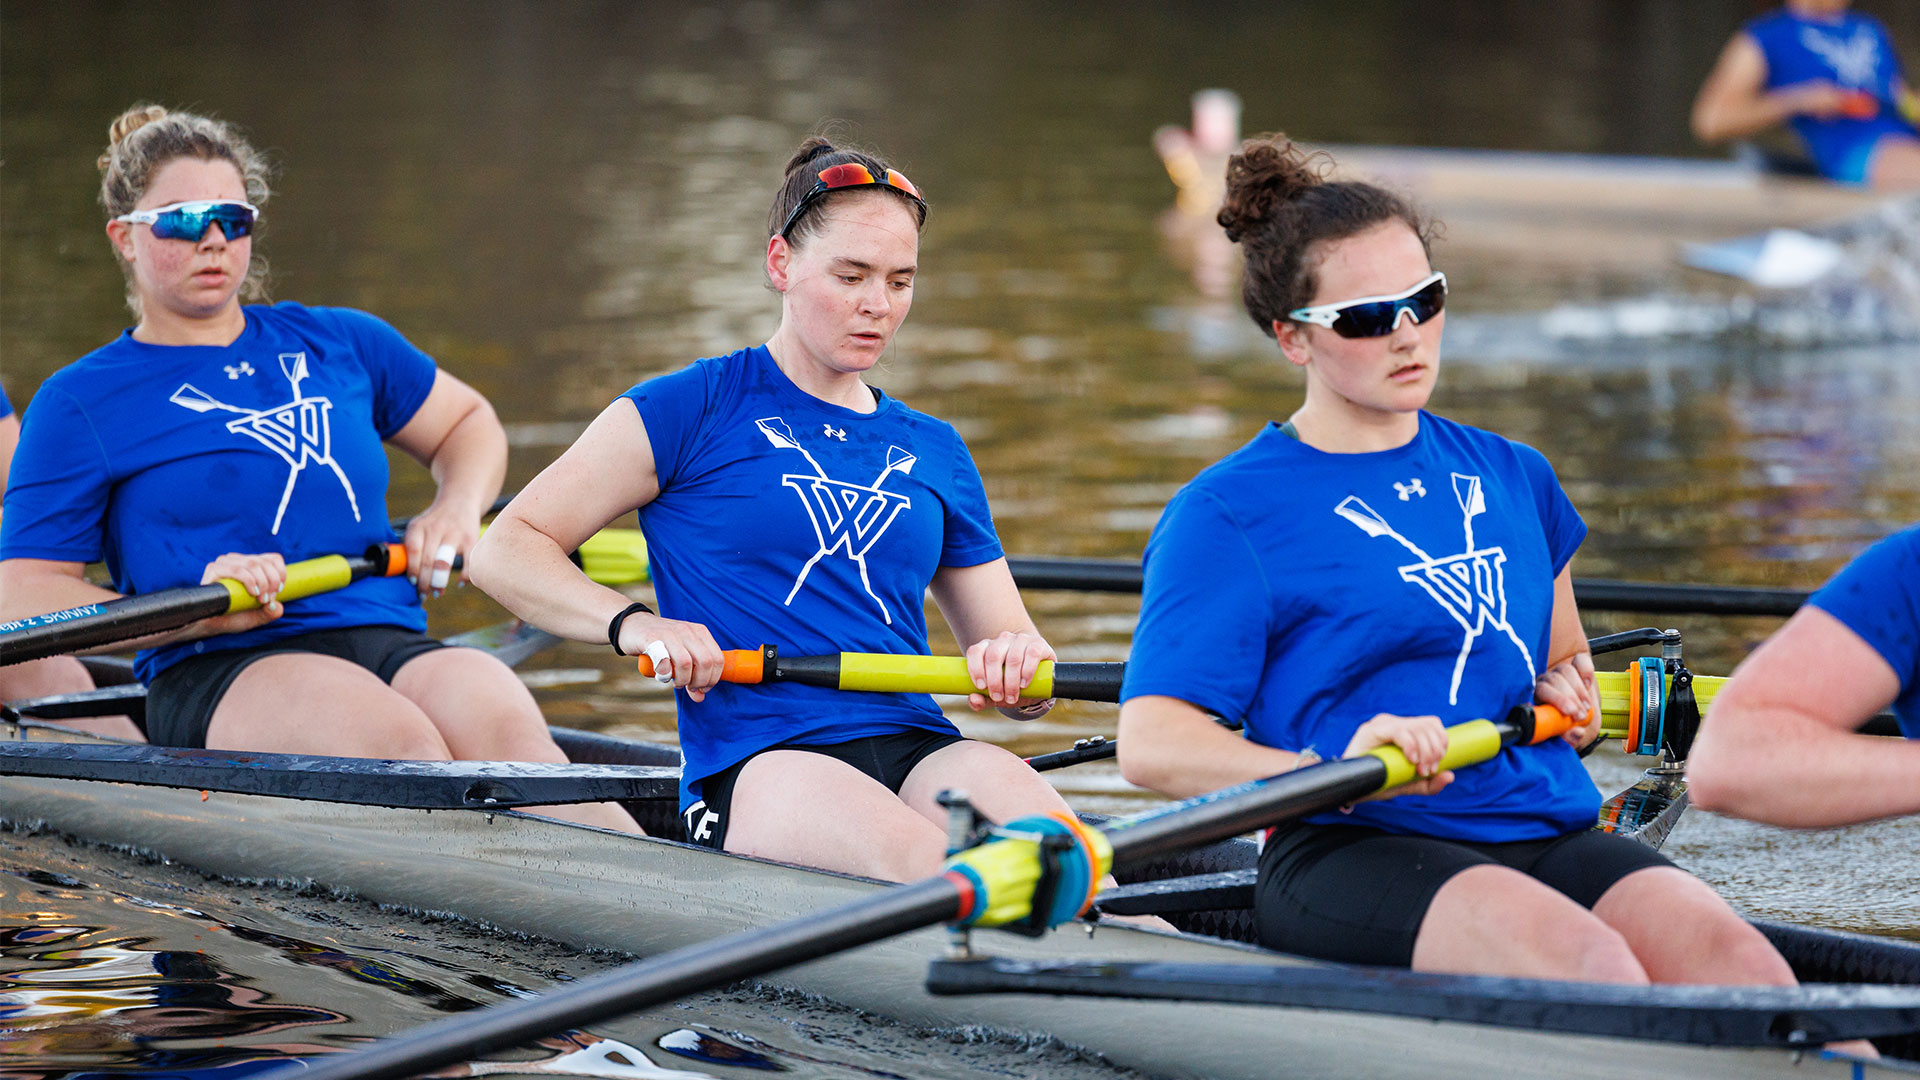 The Blue will compete in the Women's Collegiate 8+ and Women's Collegiate 4+ races on Sunday afternoon.